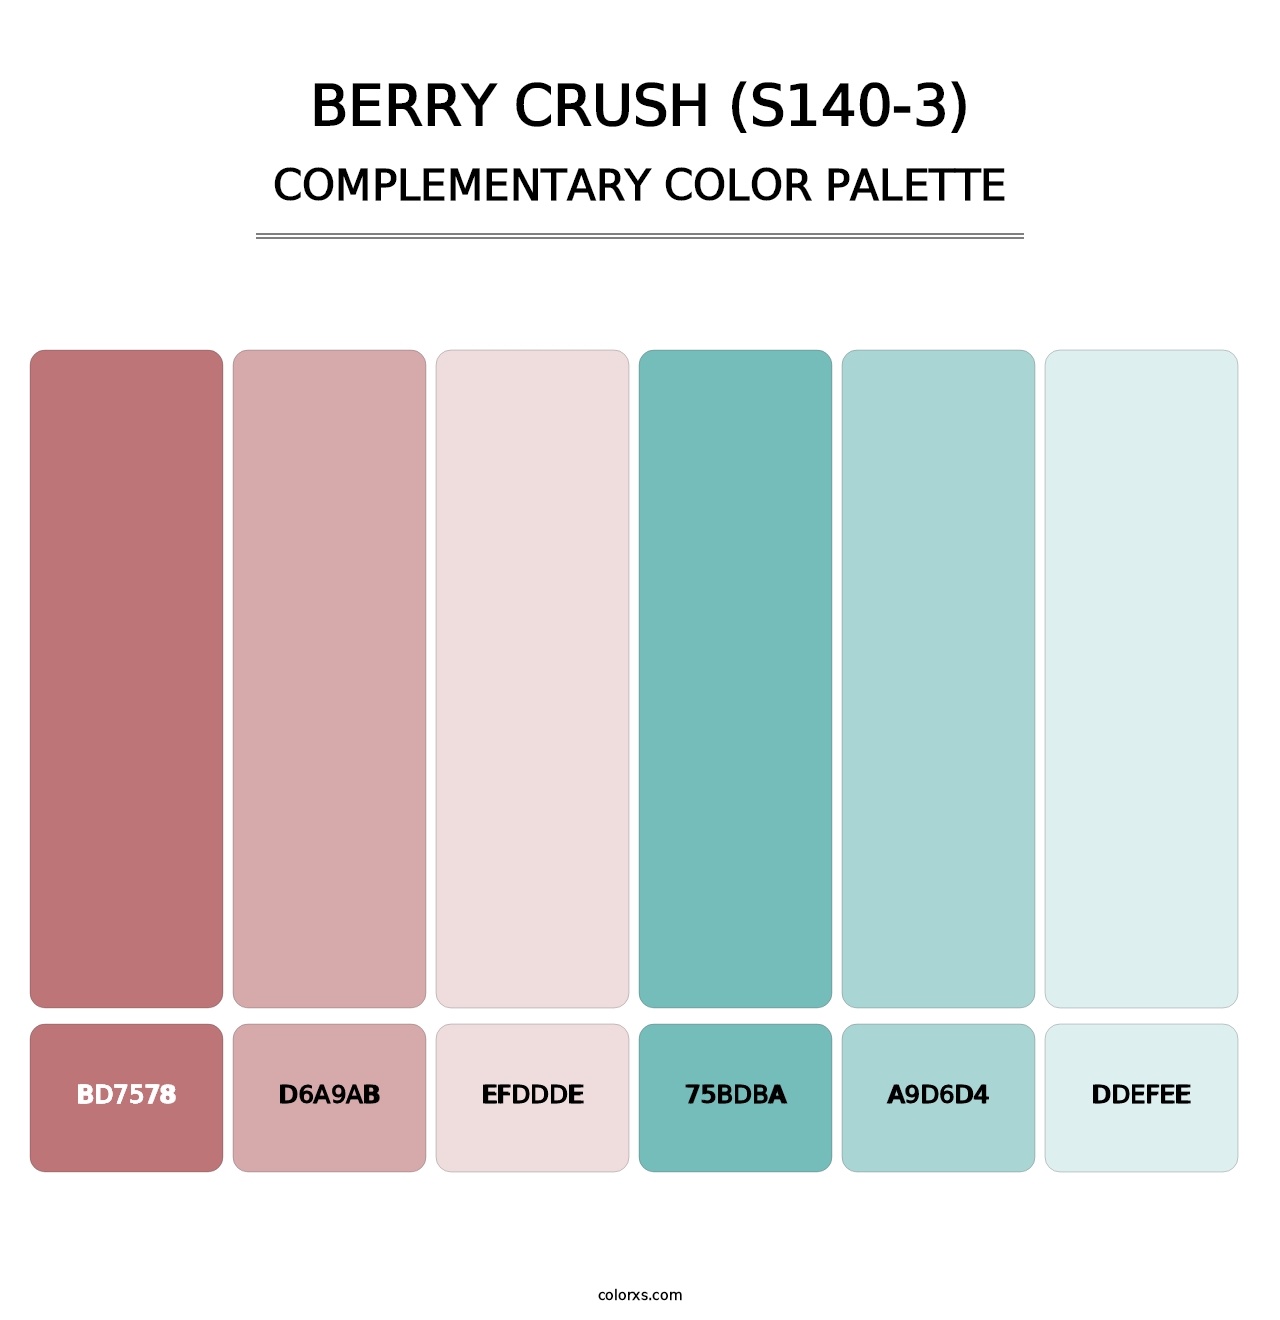 Berry Crush (S140-3) - Complementary Color Palette